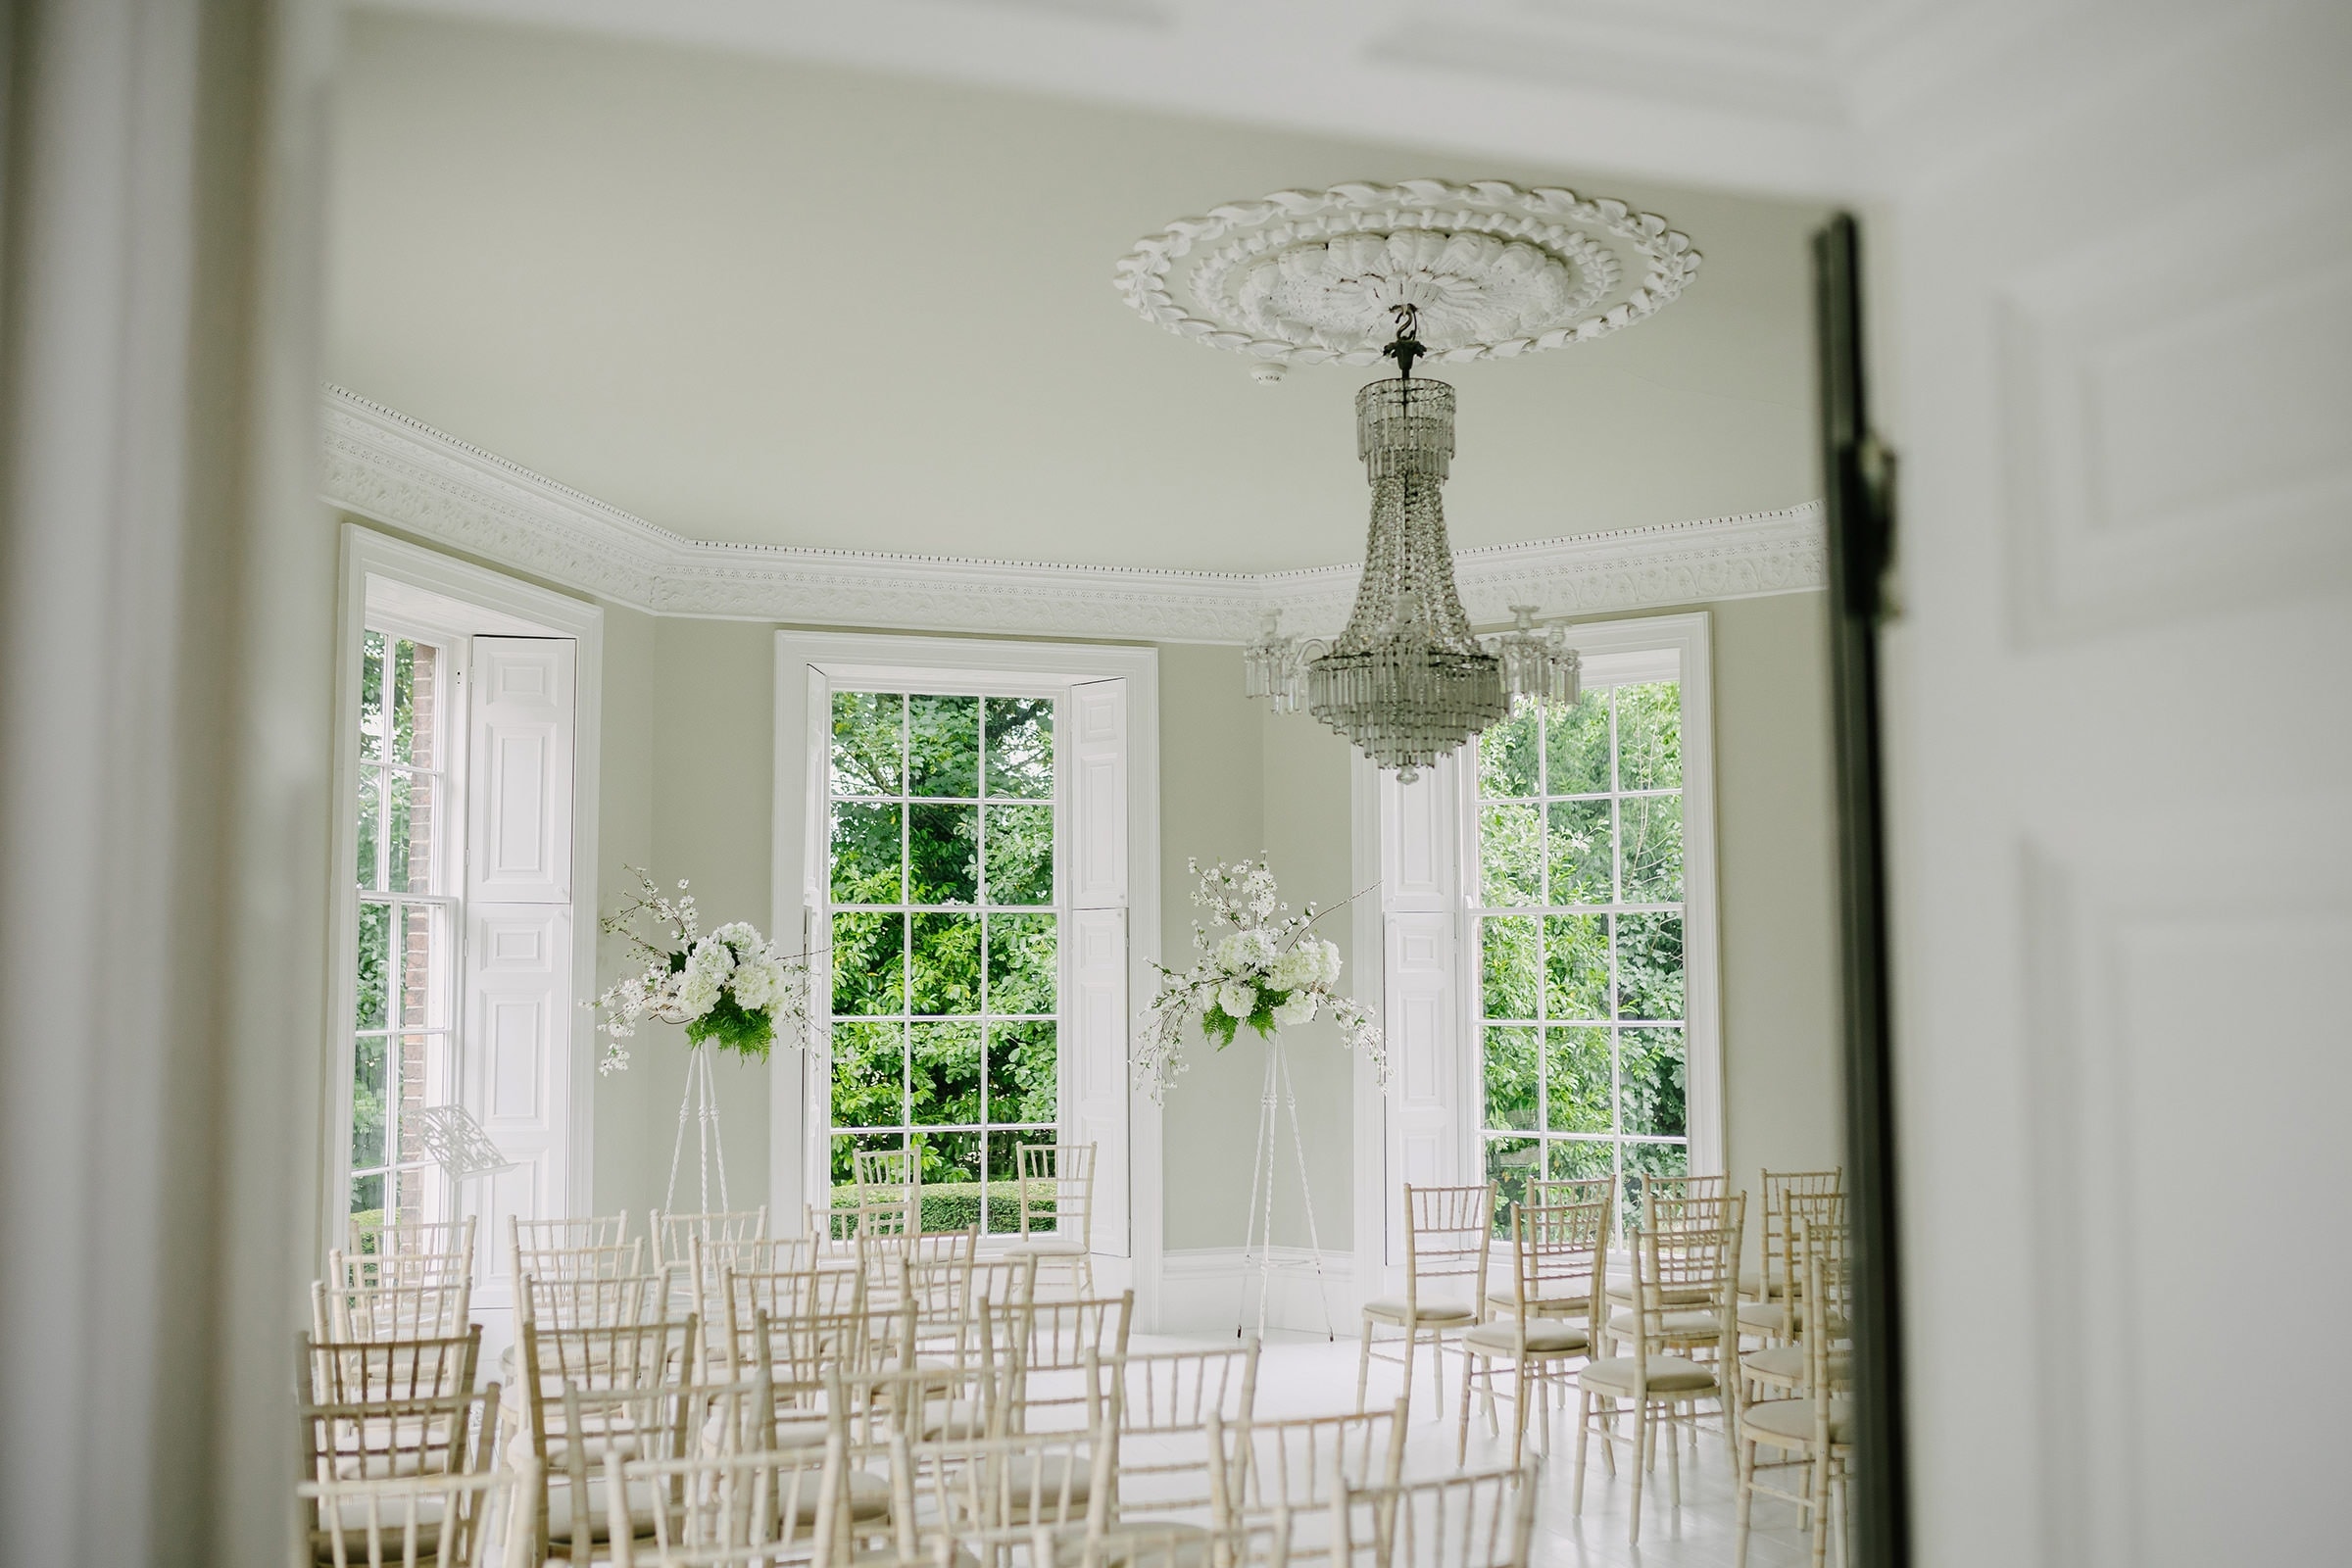 wedding photography needs 1 key ingredient and thats good light throughout the ceremony space